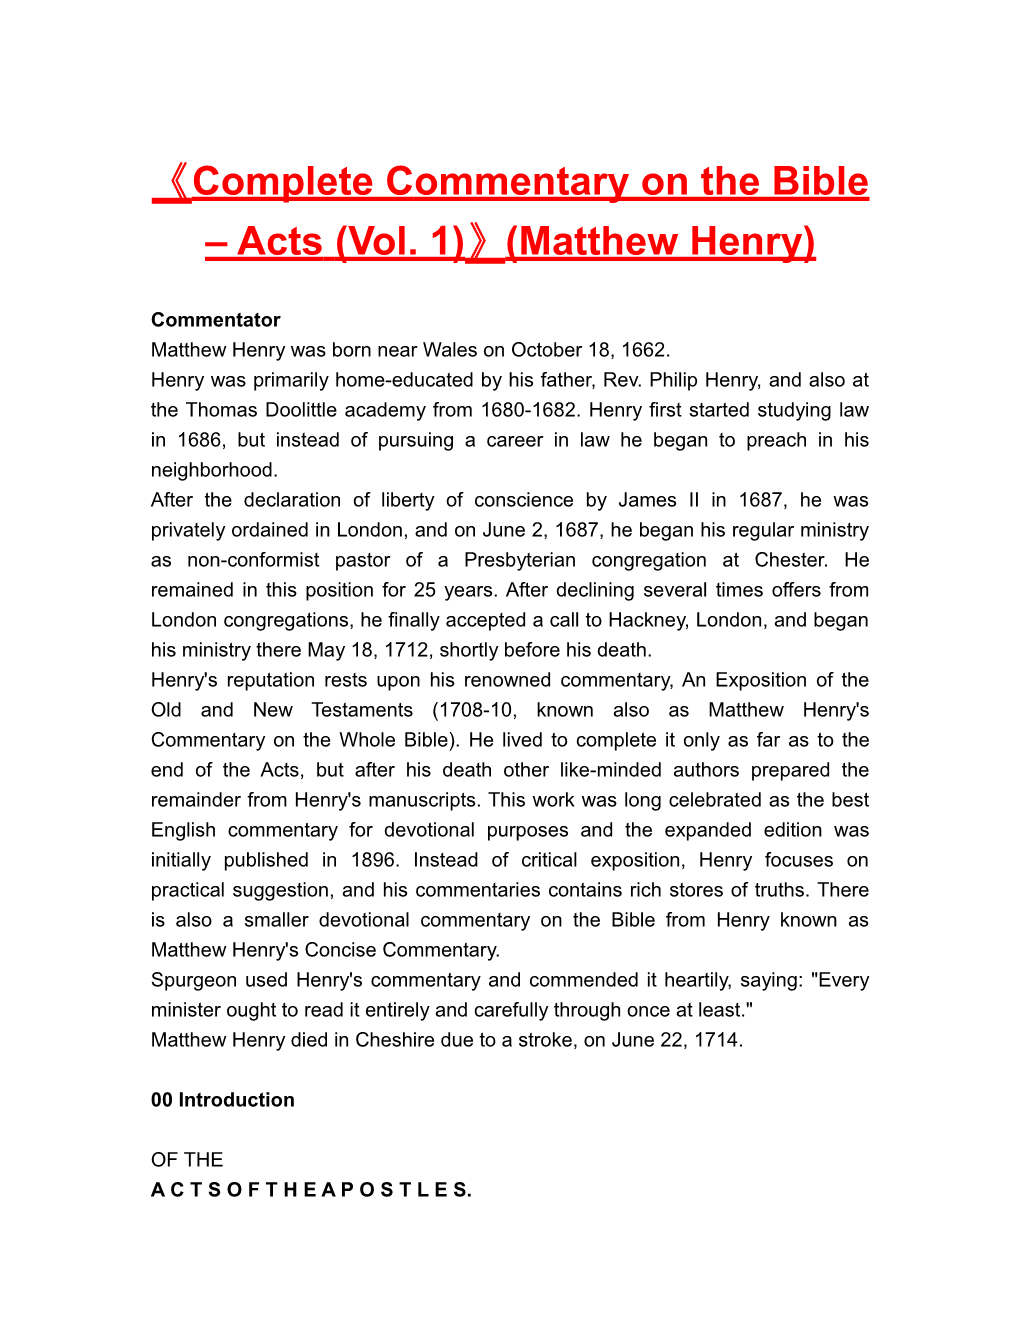 Complete Commentary on the Bible Acts (Vol. 1) (Matthew Henry)